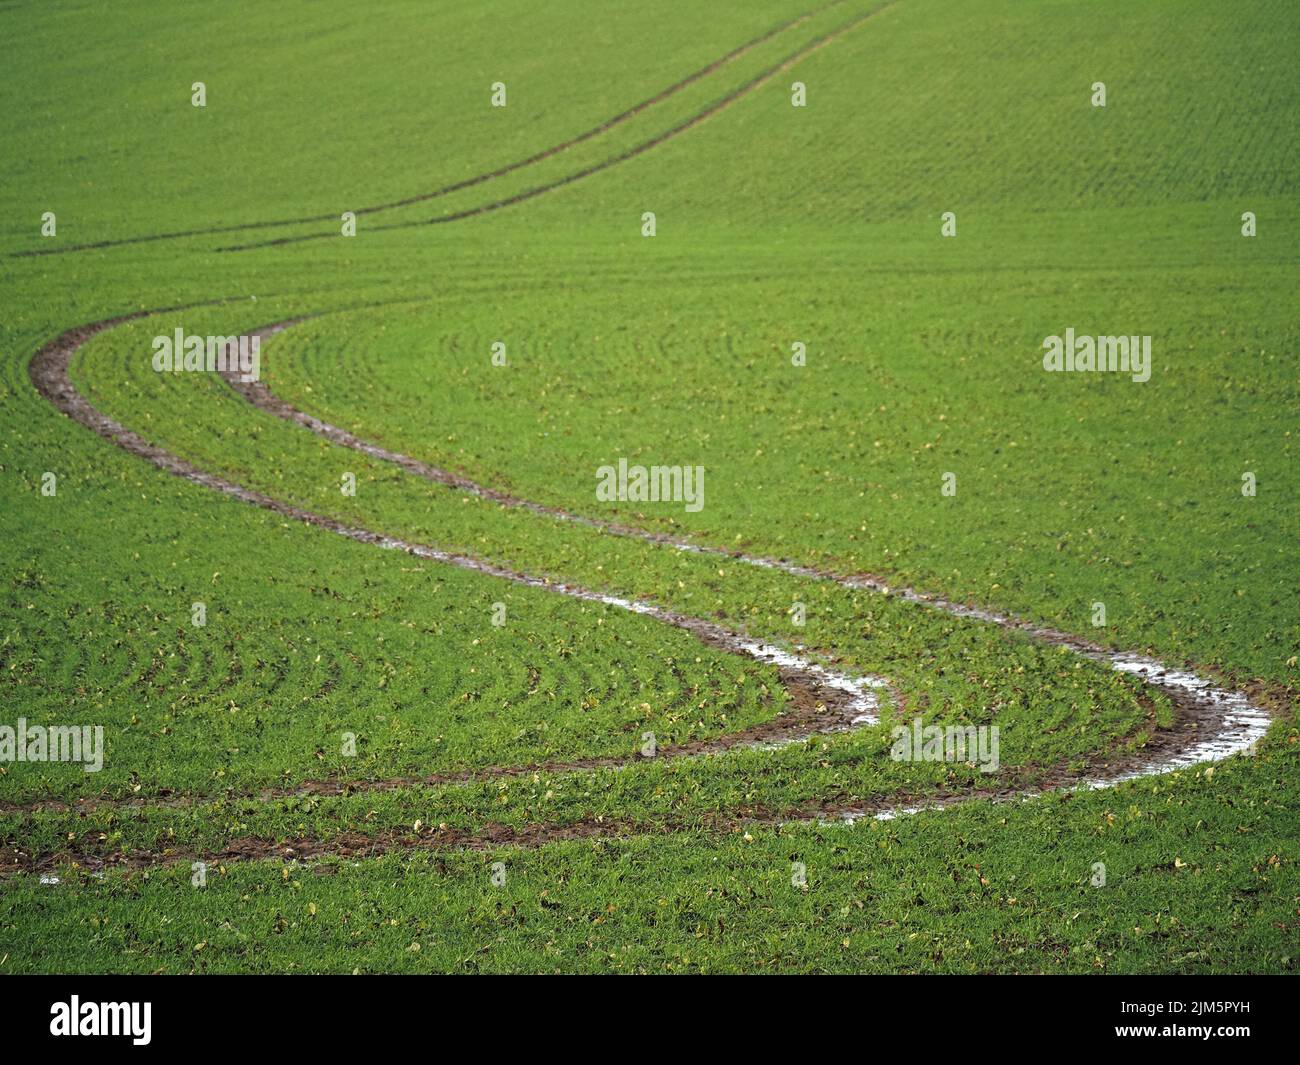 S bends of wet muddy winding tractor tracks across sloping green seeded crop field in Wiltshire,England,UK Stock Photo